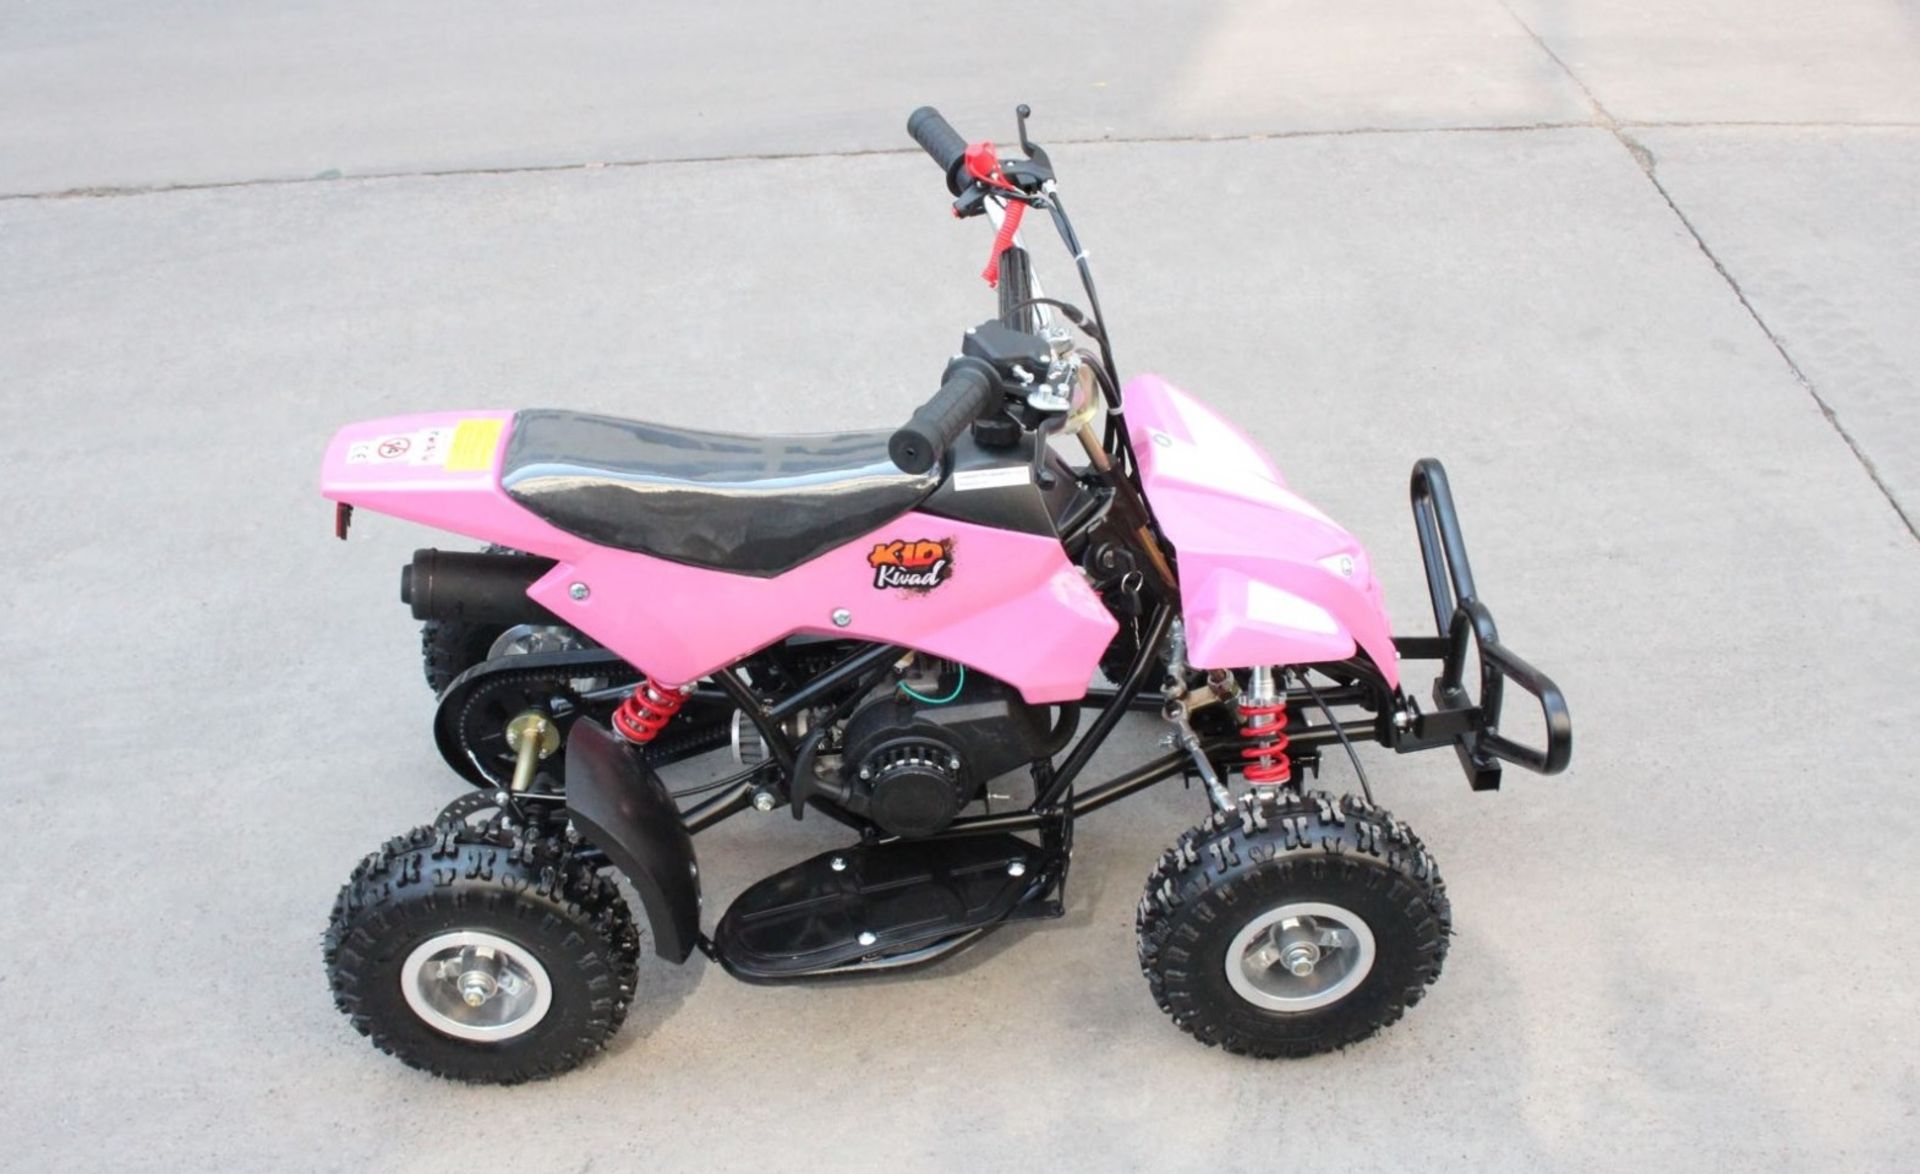 + VAT Brand New 50cc Mini Quad Bike FRM - Colours May Vary - Picture May Vary From Actual Item - Image 3 of 9